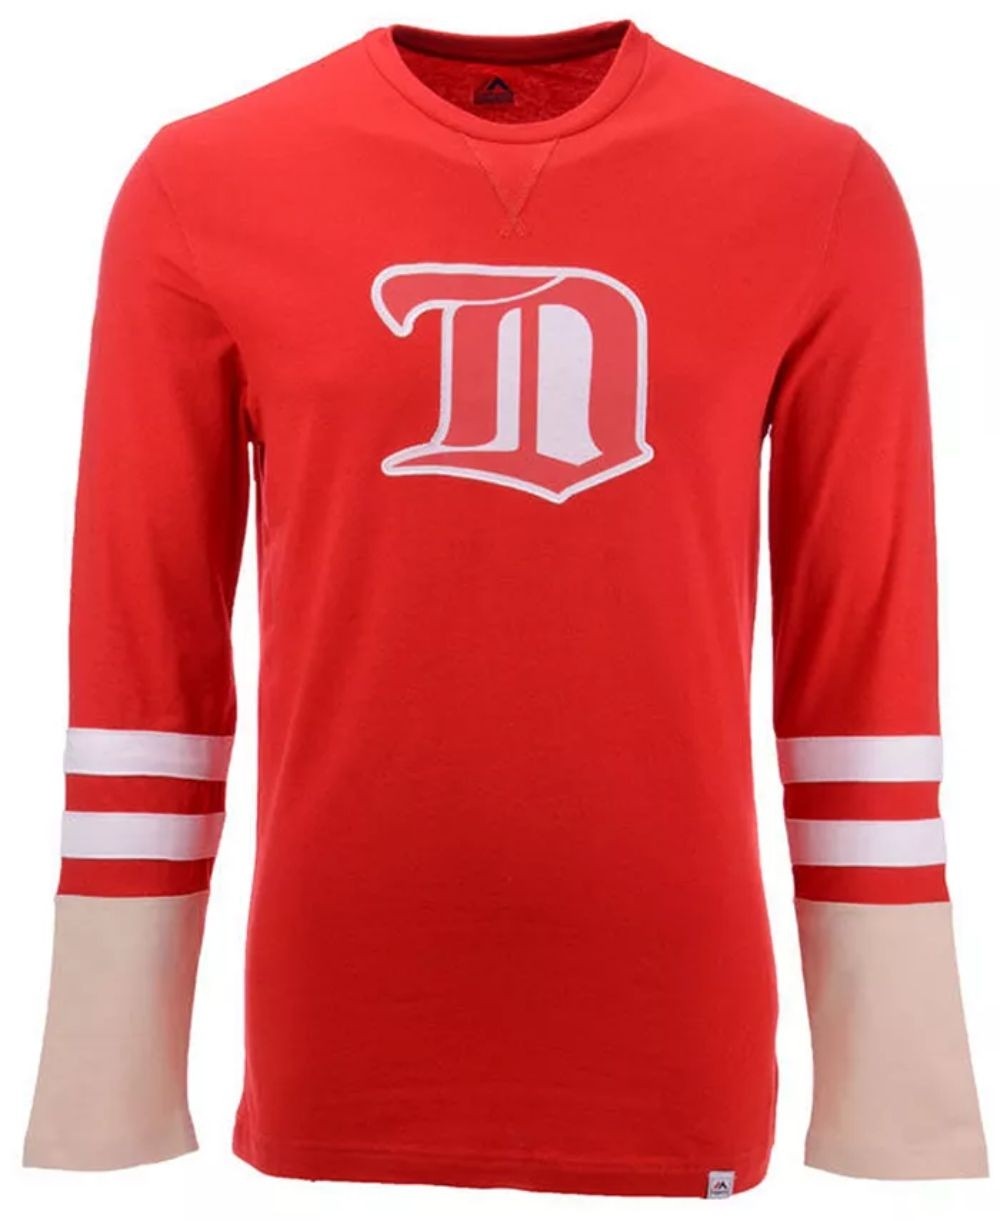 Detroit Red Wings Long Sleeve T-Shirt - Vintage Detroit Collection